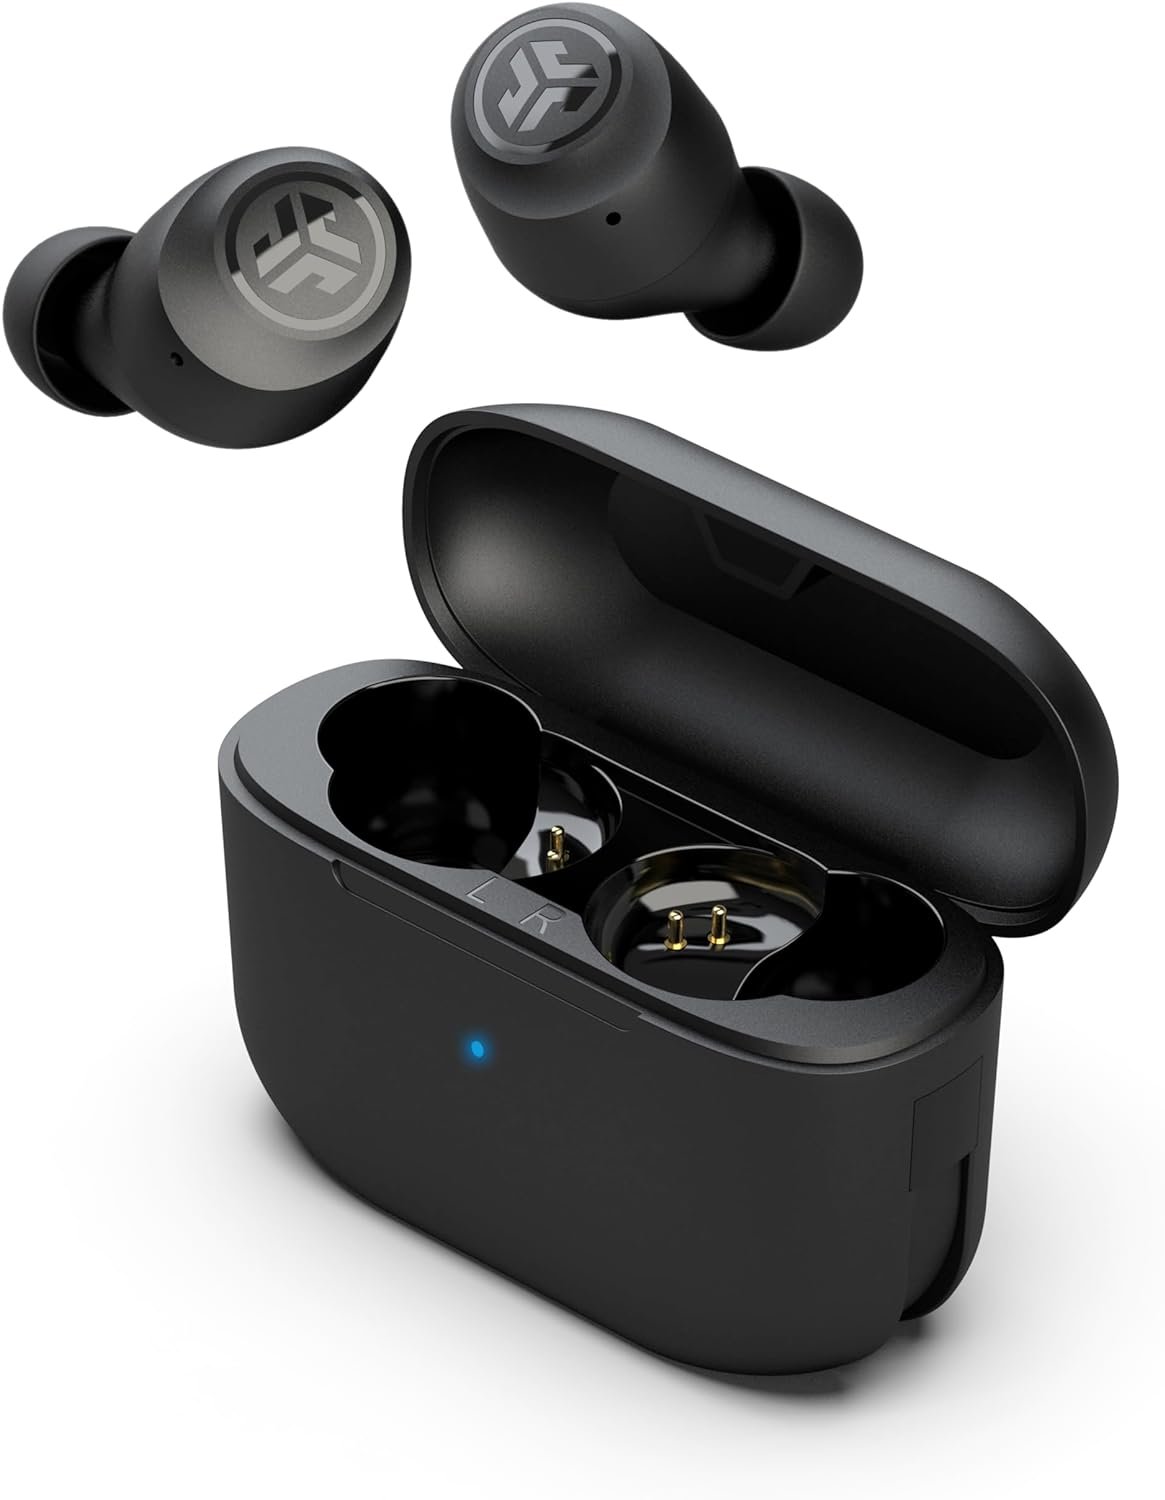 JLab Go Air Pop True Wireless Bluetooth Earbuds + Charging Case, Black, Dual Connect, IPX4 Sweat Resistance, Bluetooth 5.1 Connection, 3 EQ Sound Settings Signature, Balanced, Bass Boost